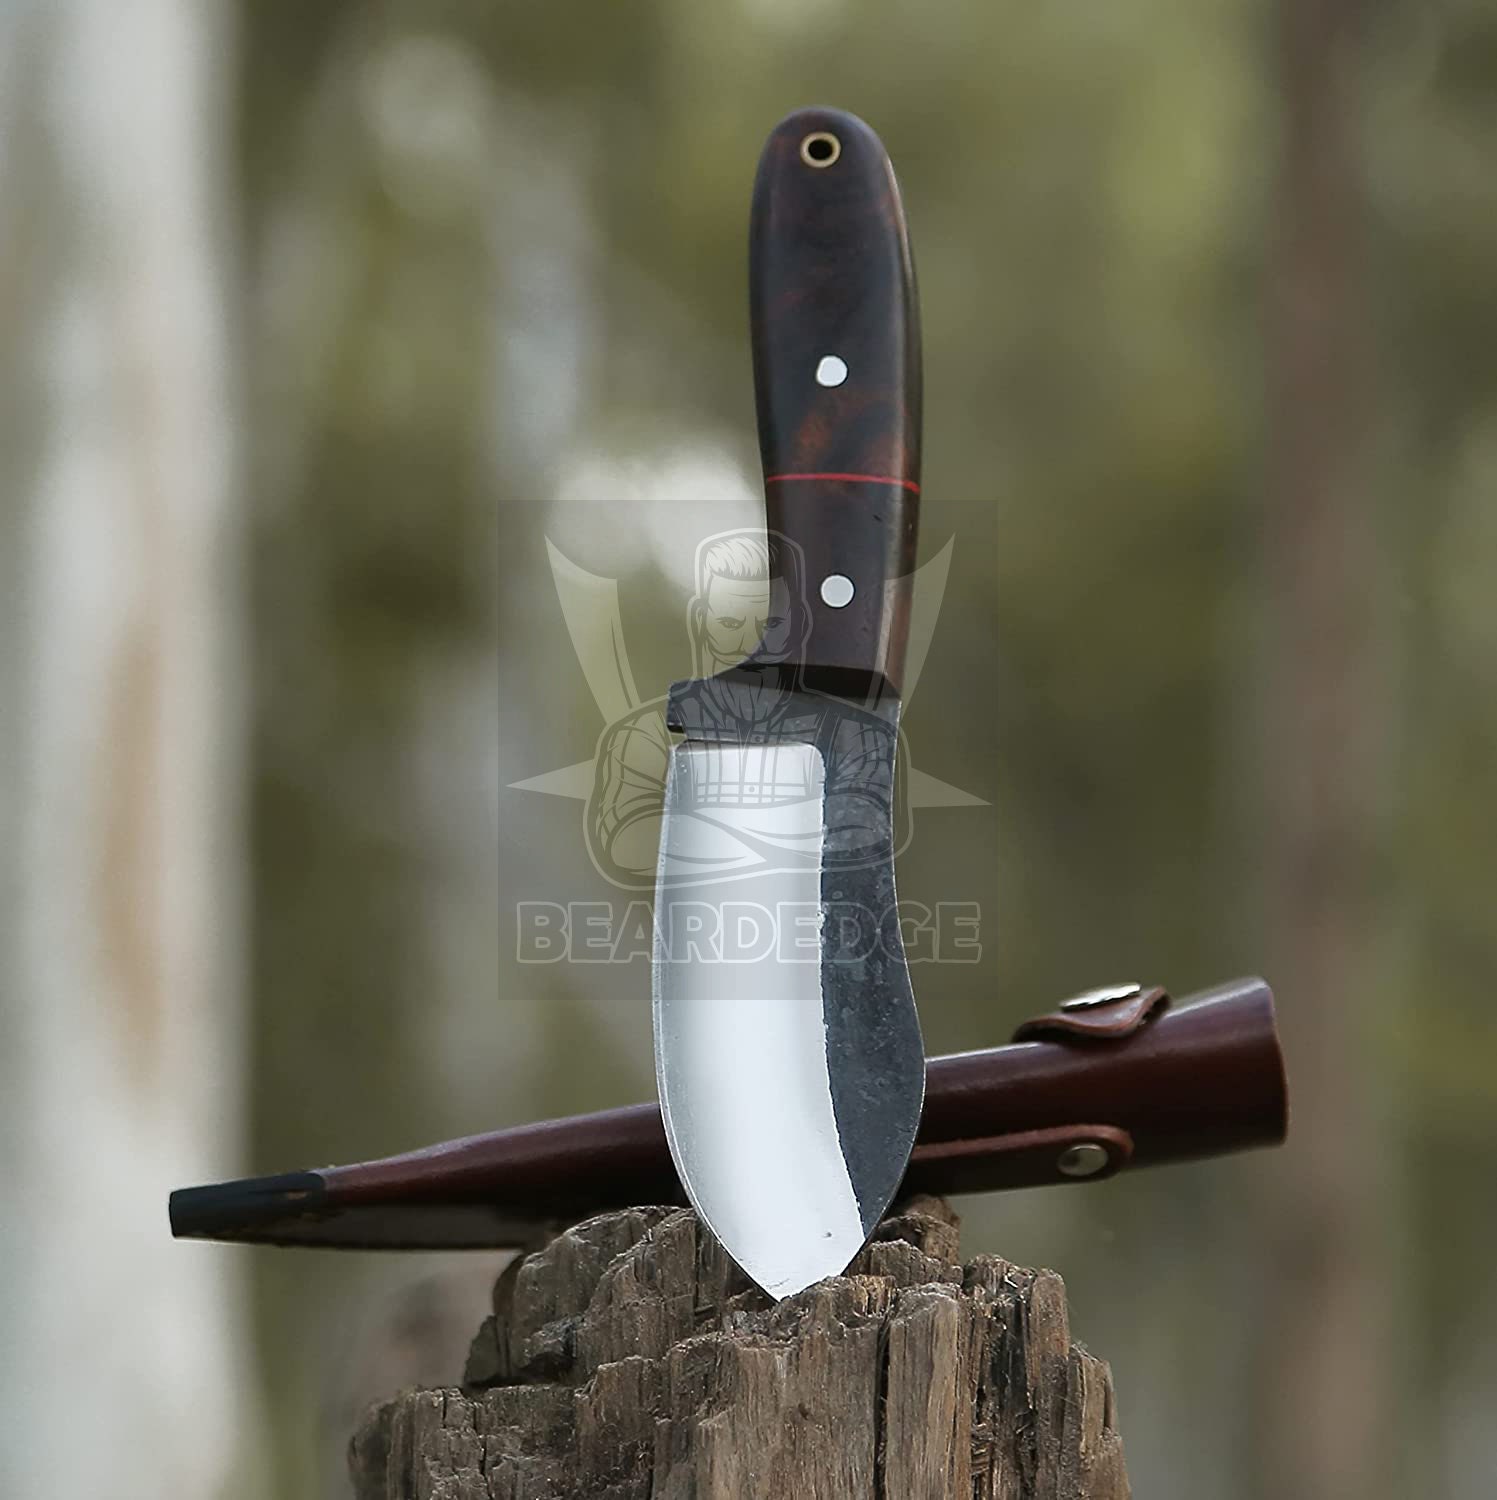 Small Trapper / Bushcraft Knife, Hand Forged High Carbon Steel